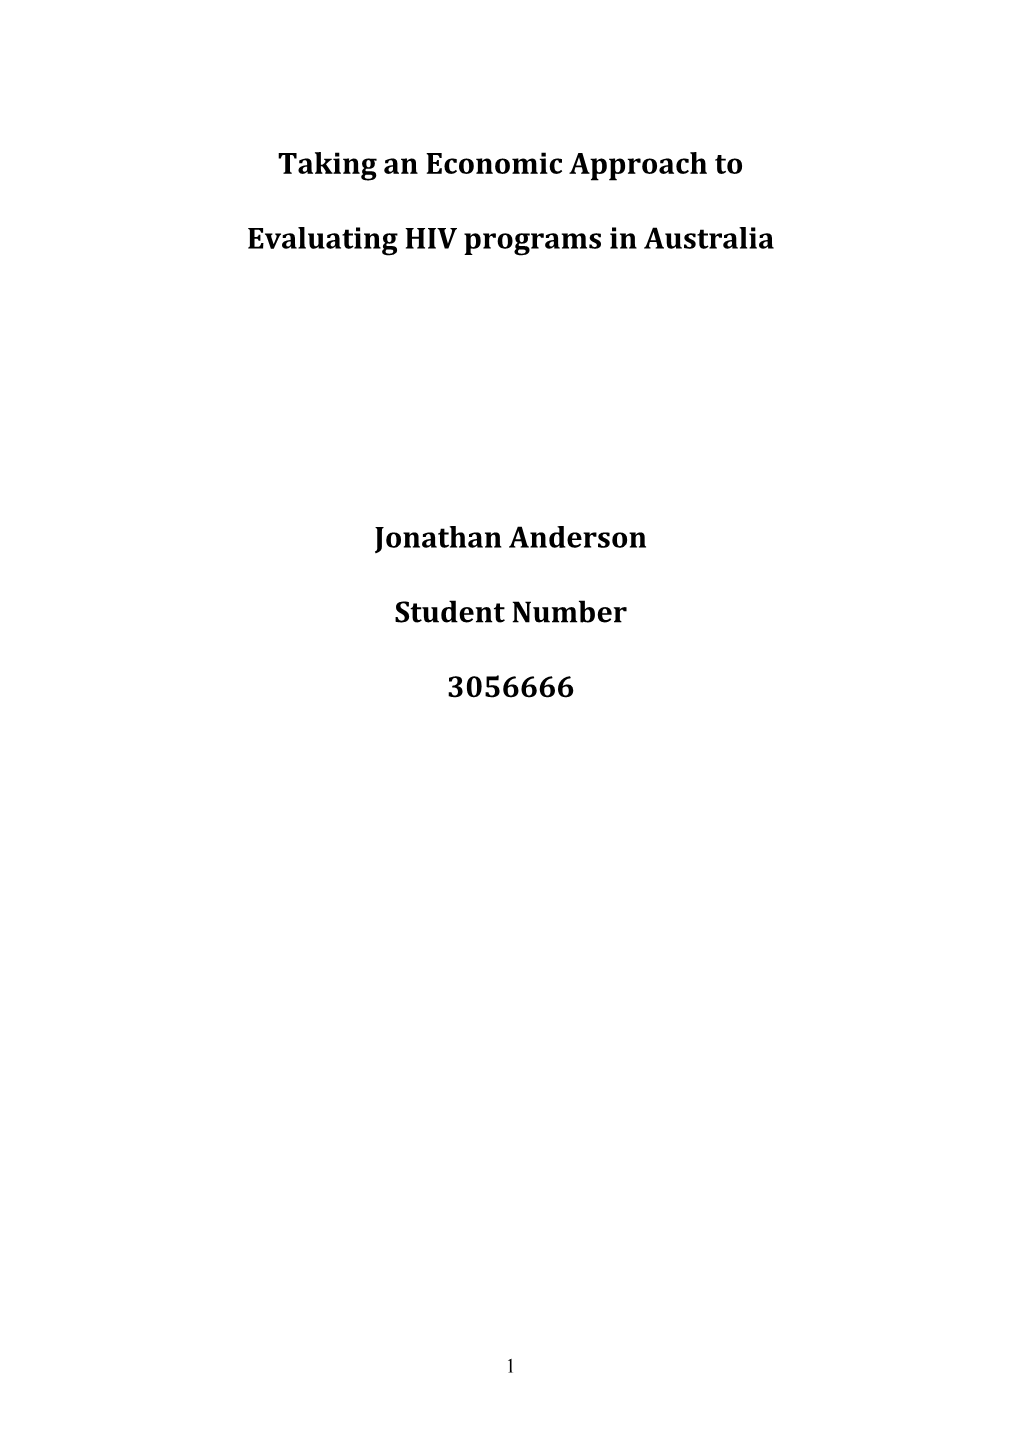 Taking an Economic Approach to Evaluating HIV Programs in Australia